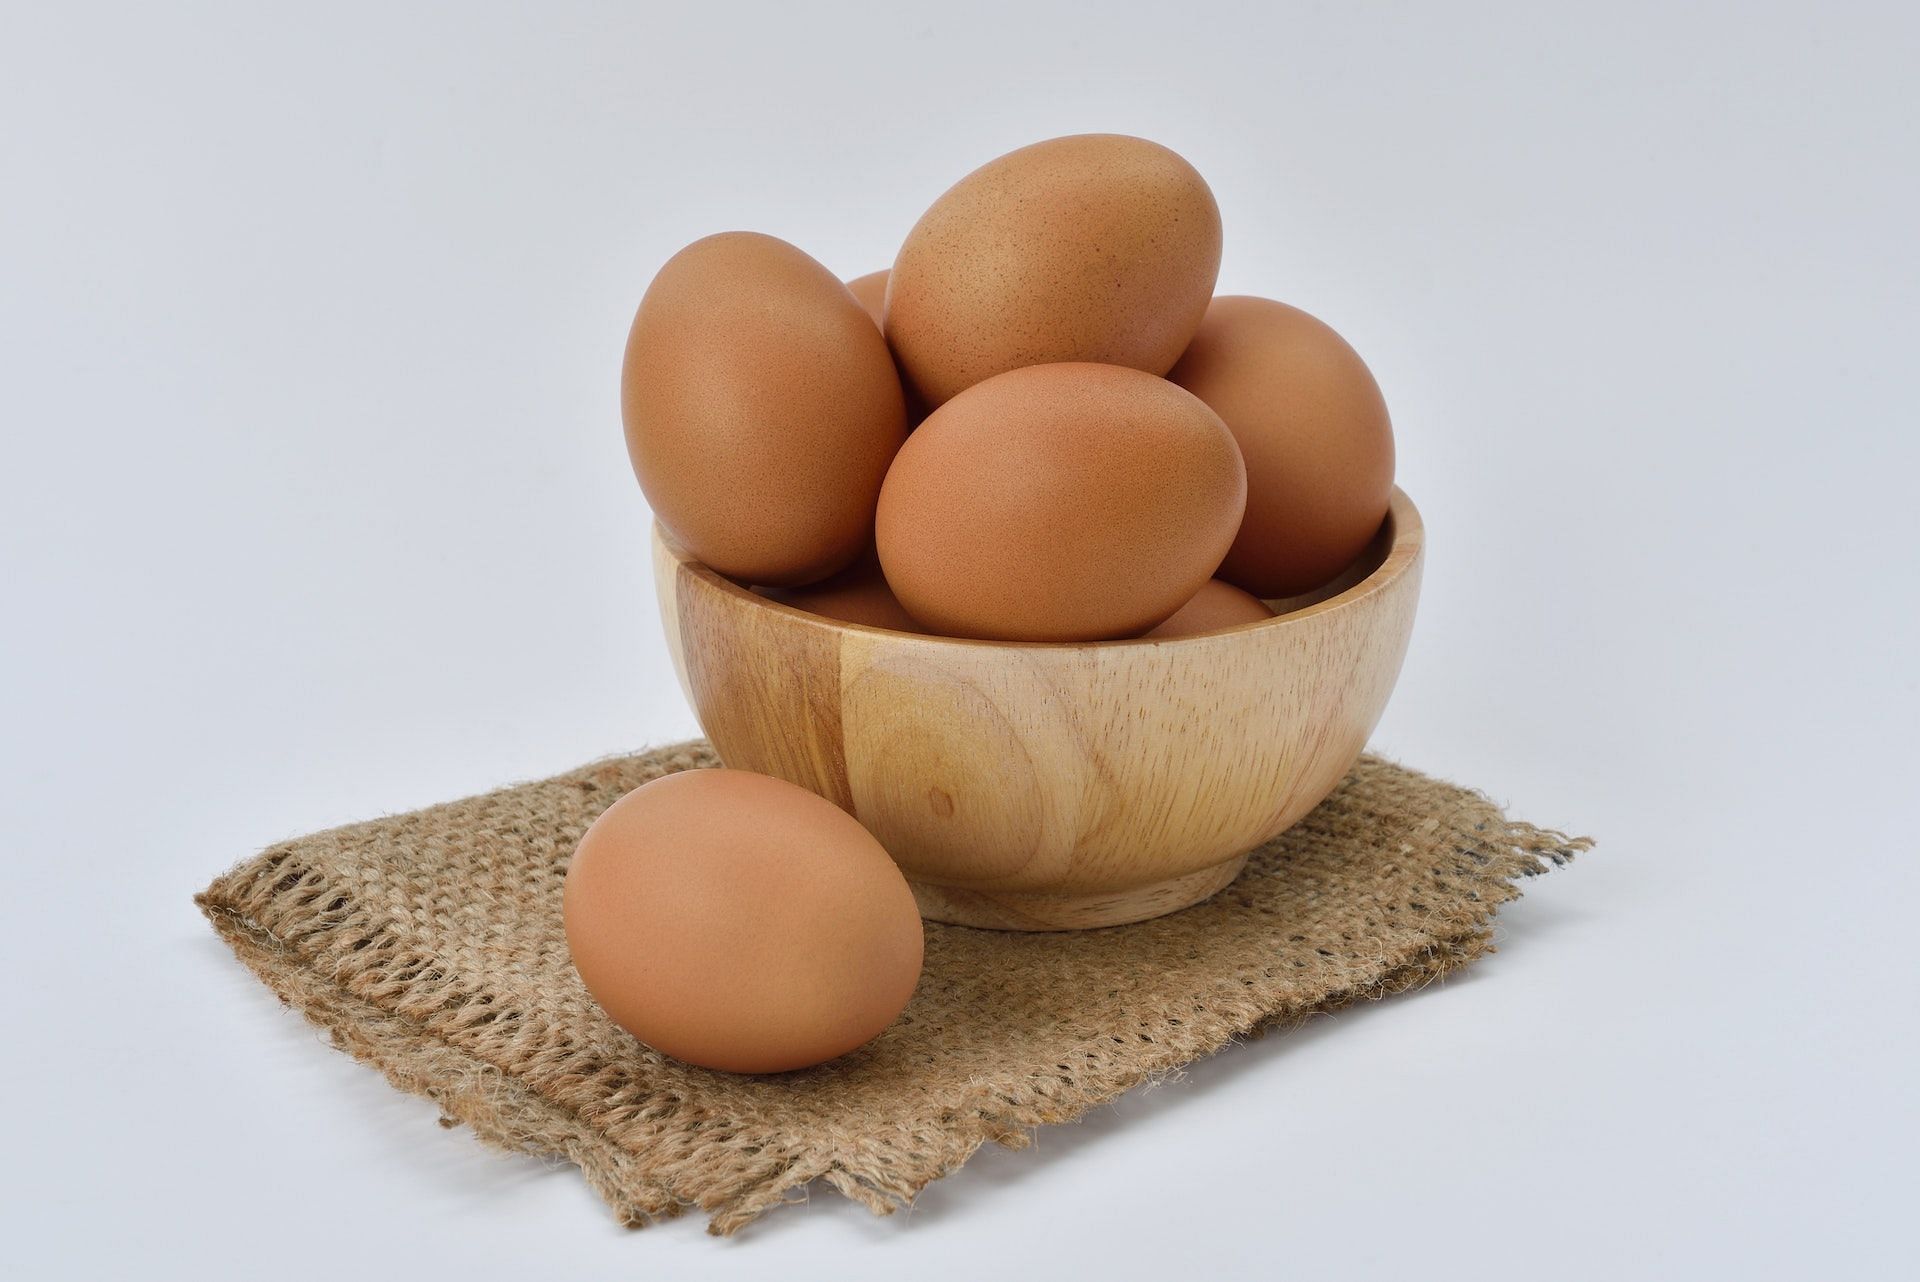 Eggs are considered the healthiest foods for skin. (Image via Pexels/Pixabay)